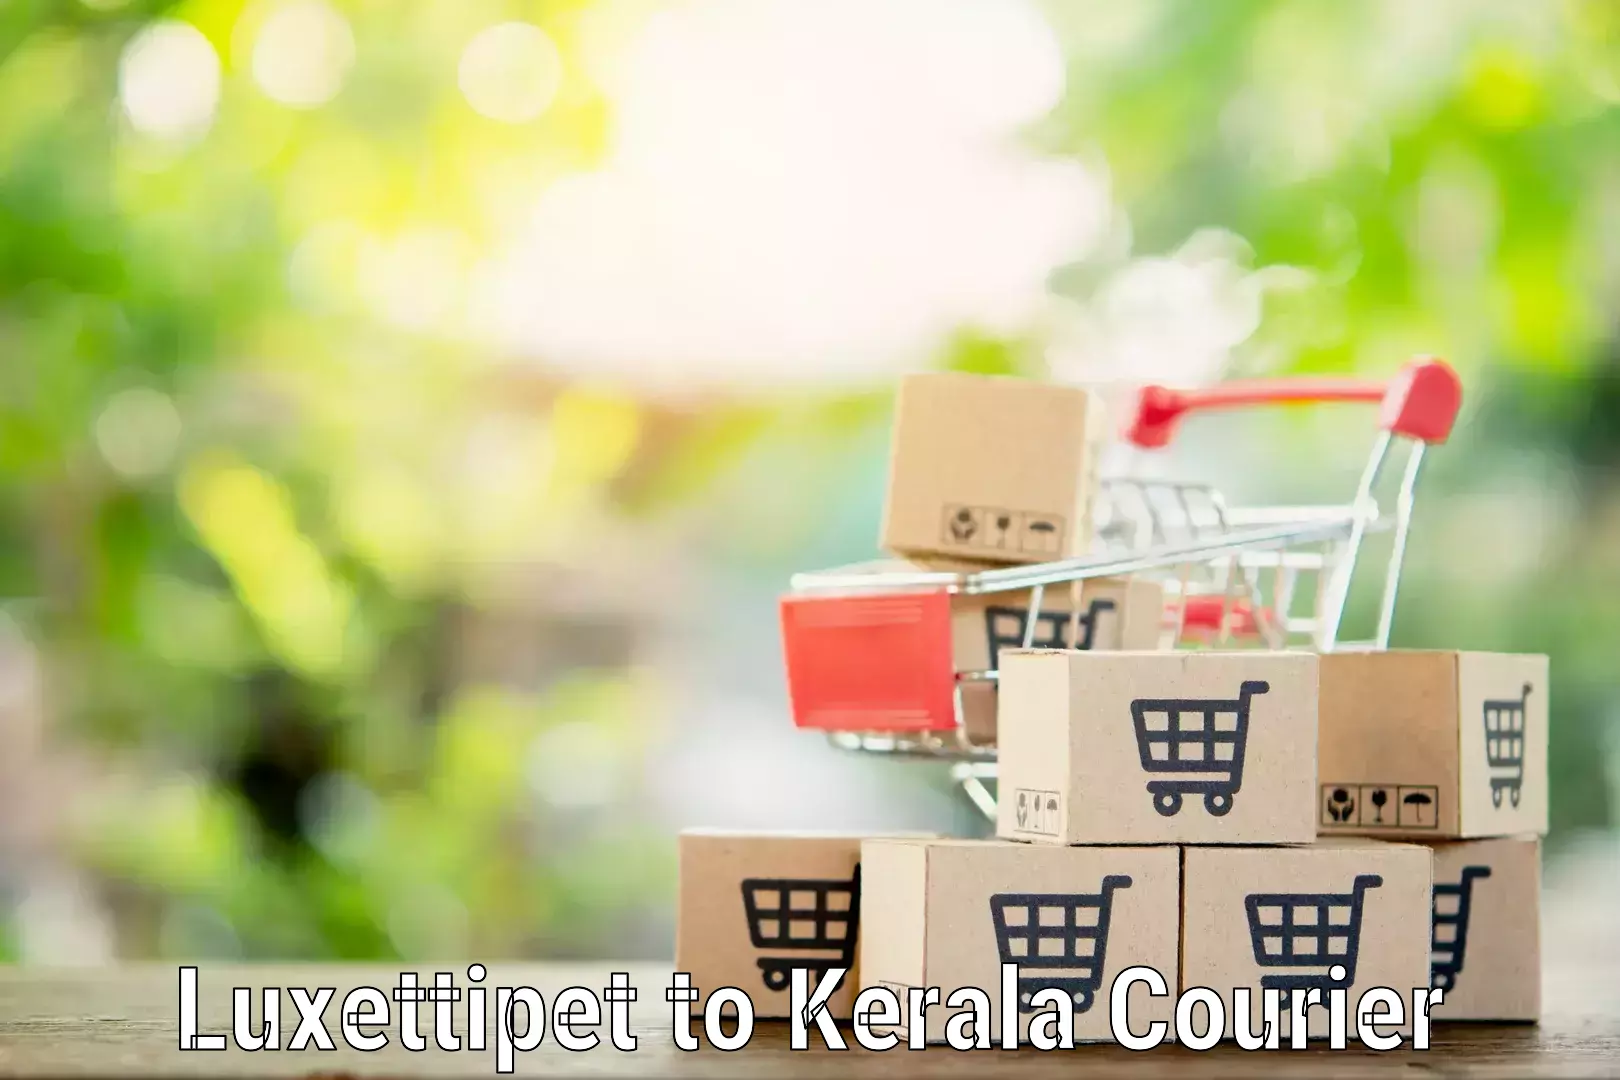 Professional movers and packers Luxettipet to Kannur